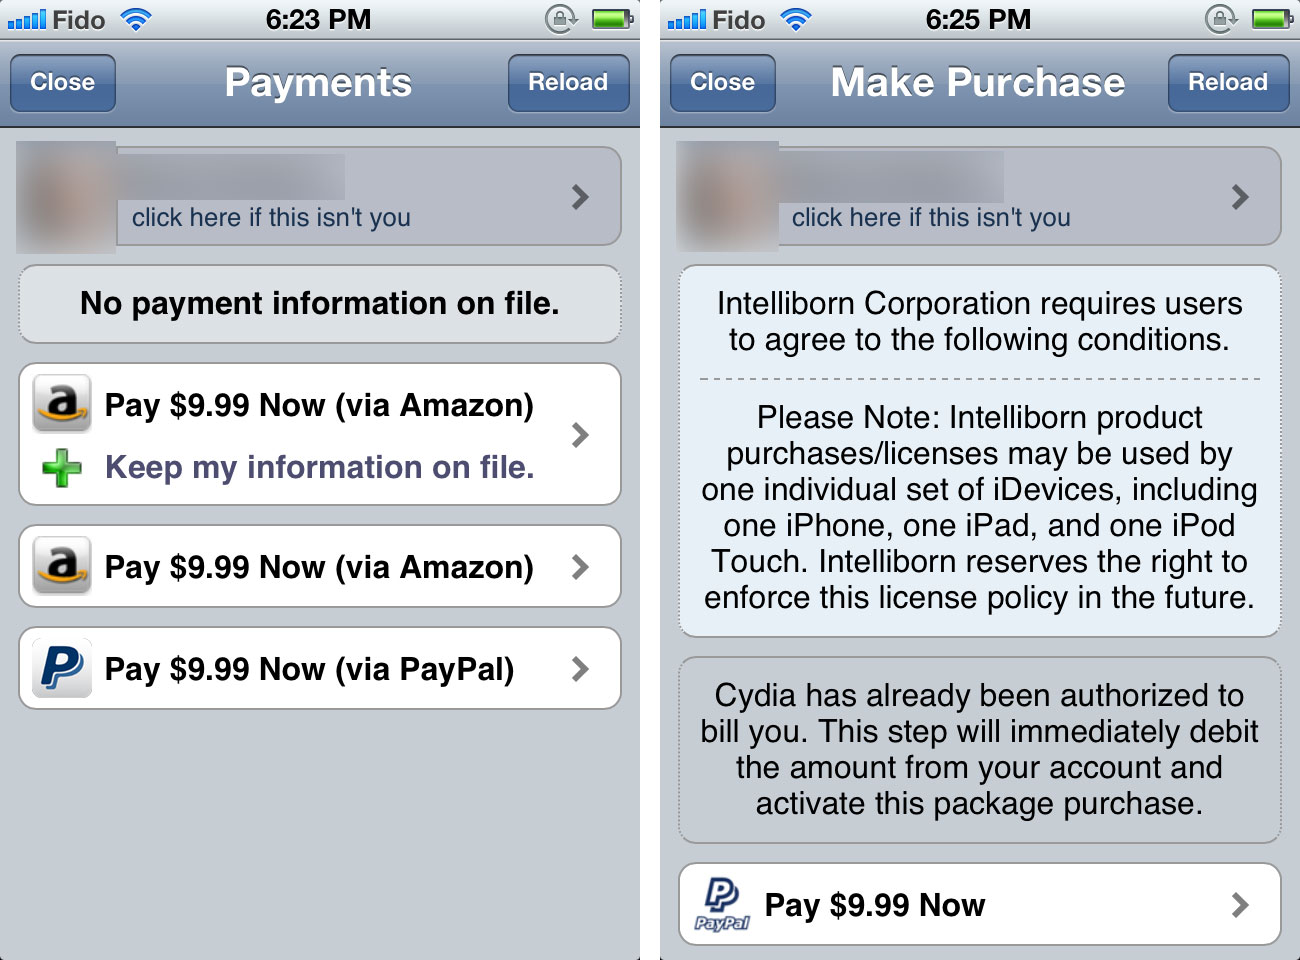 And login separately to pay via Amazon or Paypal, which sometimes has errors and sends you back to the beginning